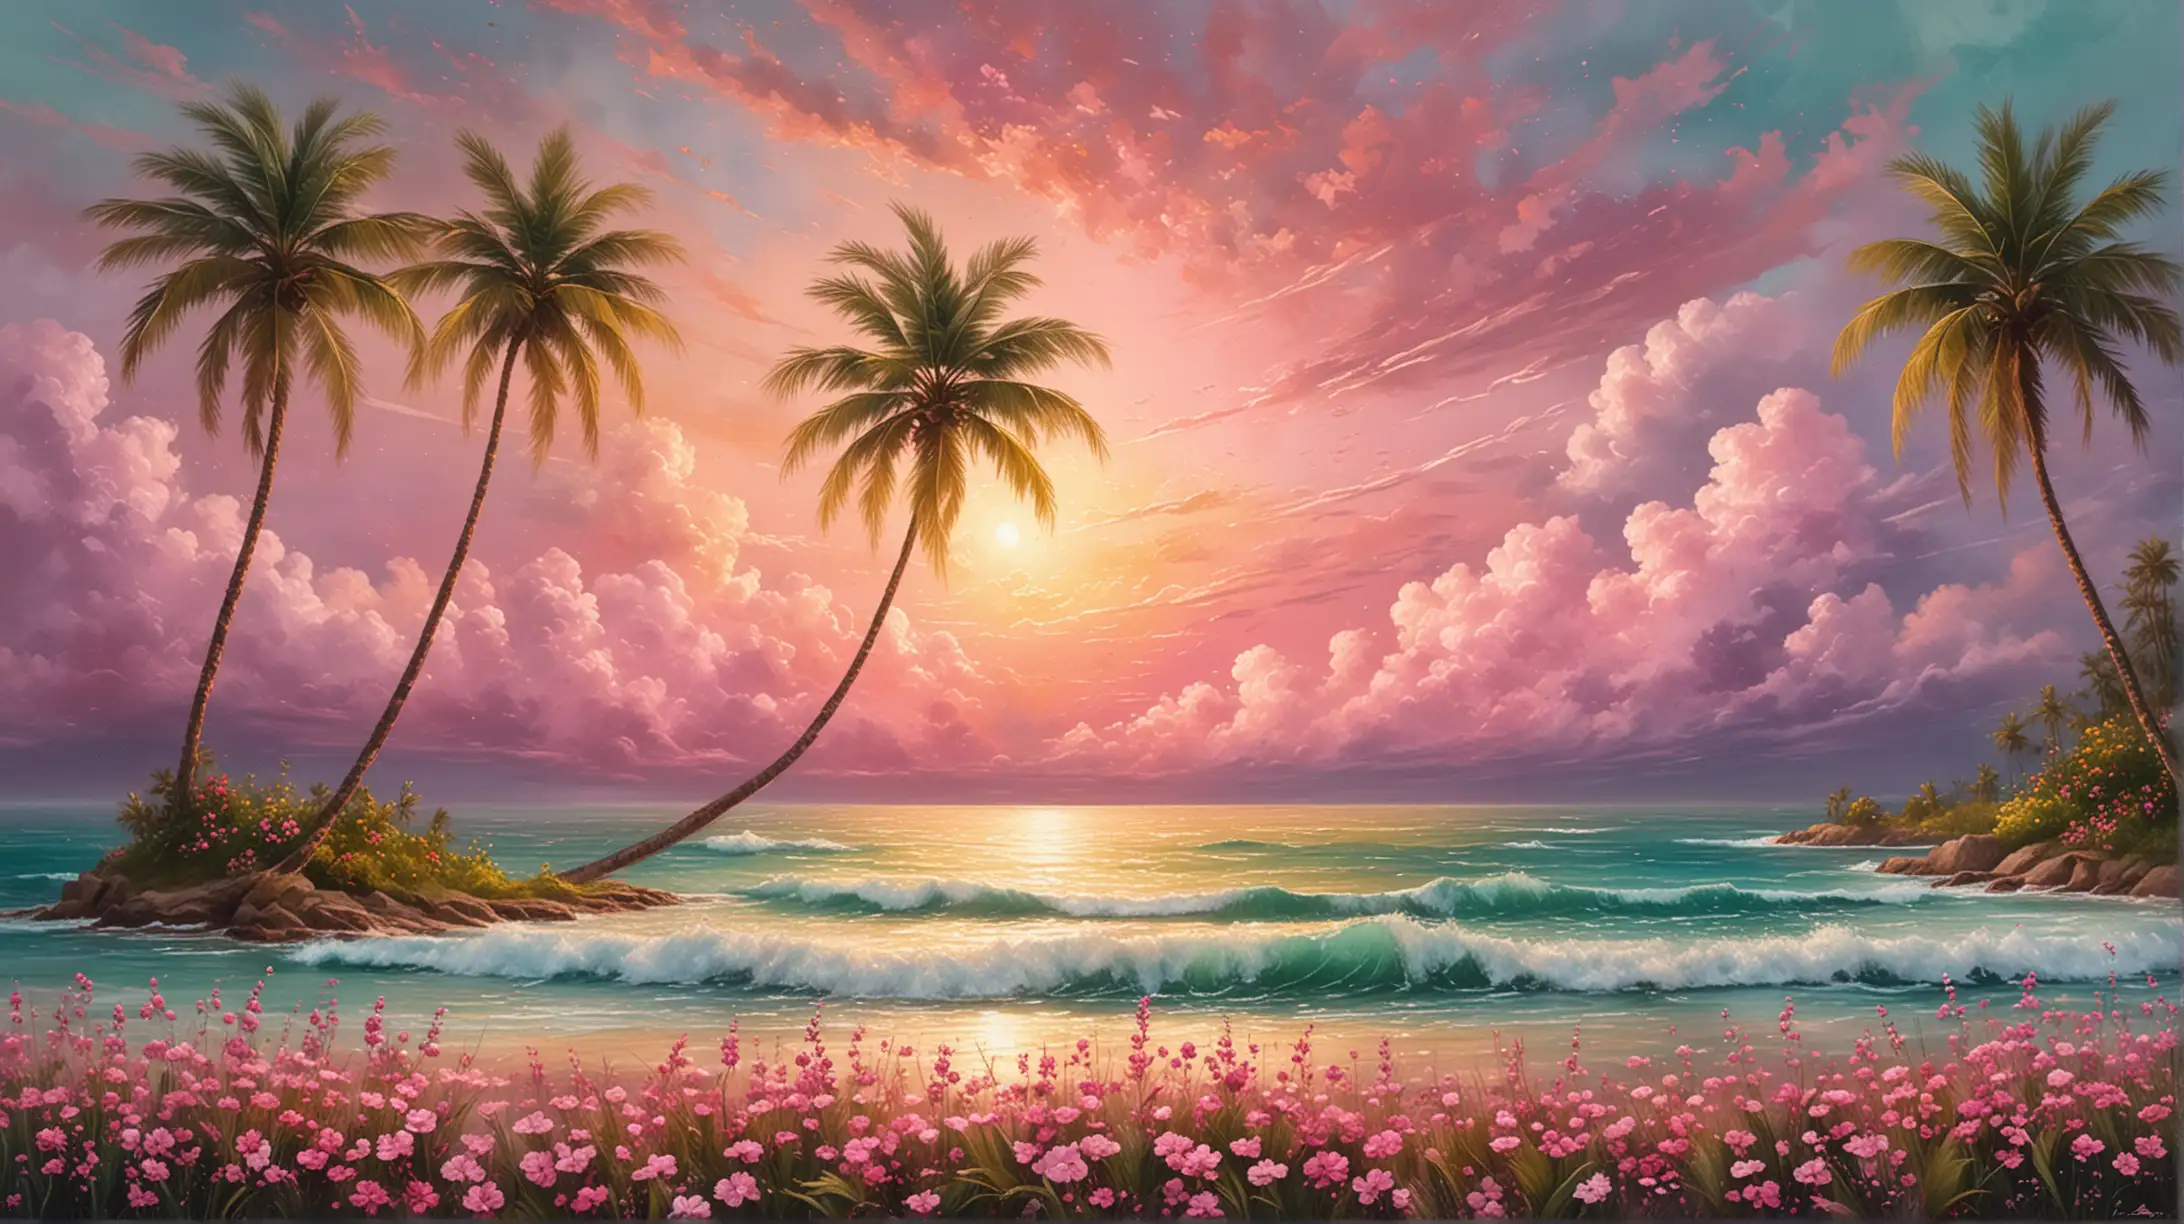 Pink Cloudy Flowers and Palm Trees Abstract Textured Oil Painting with Galaxy Sky